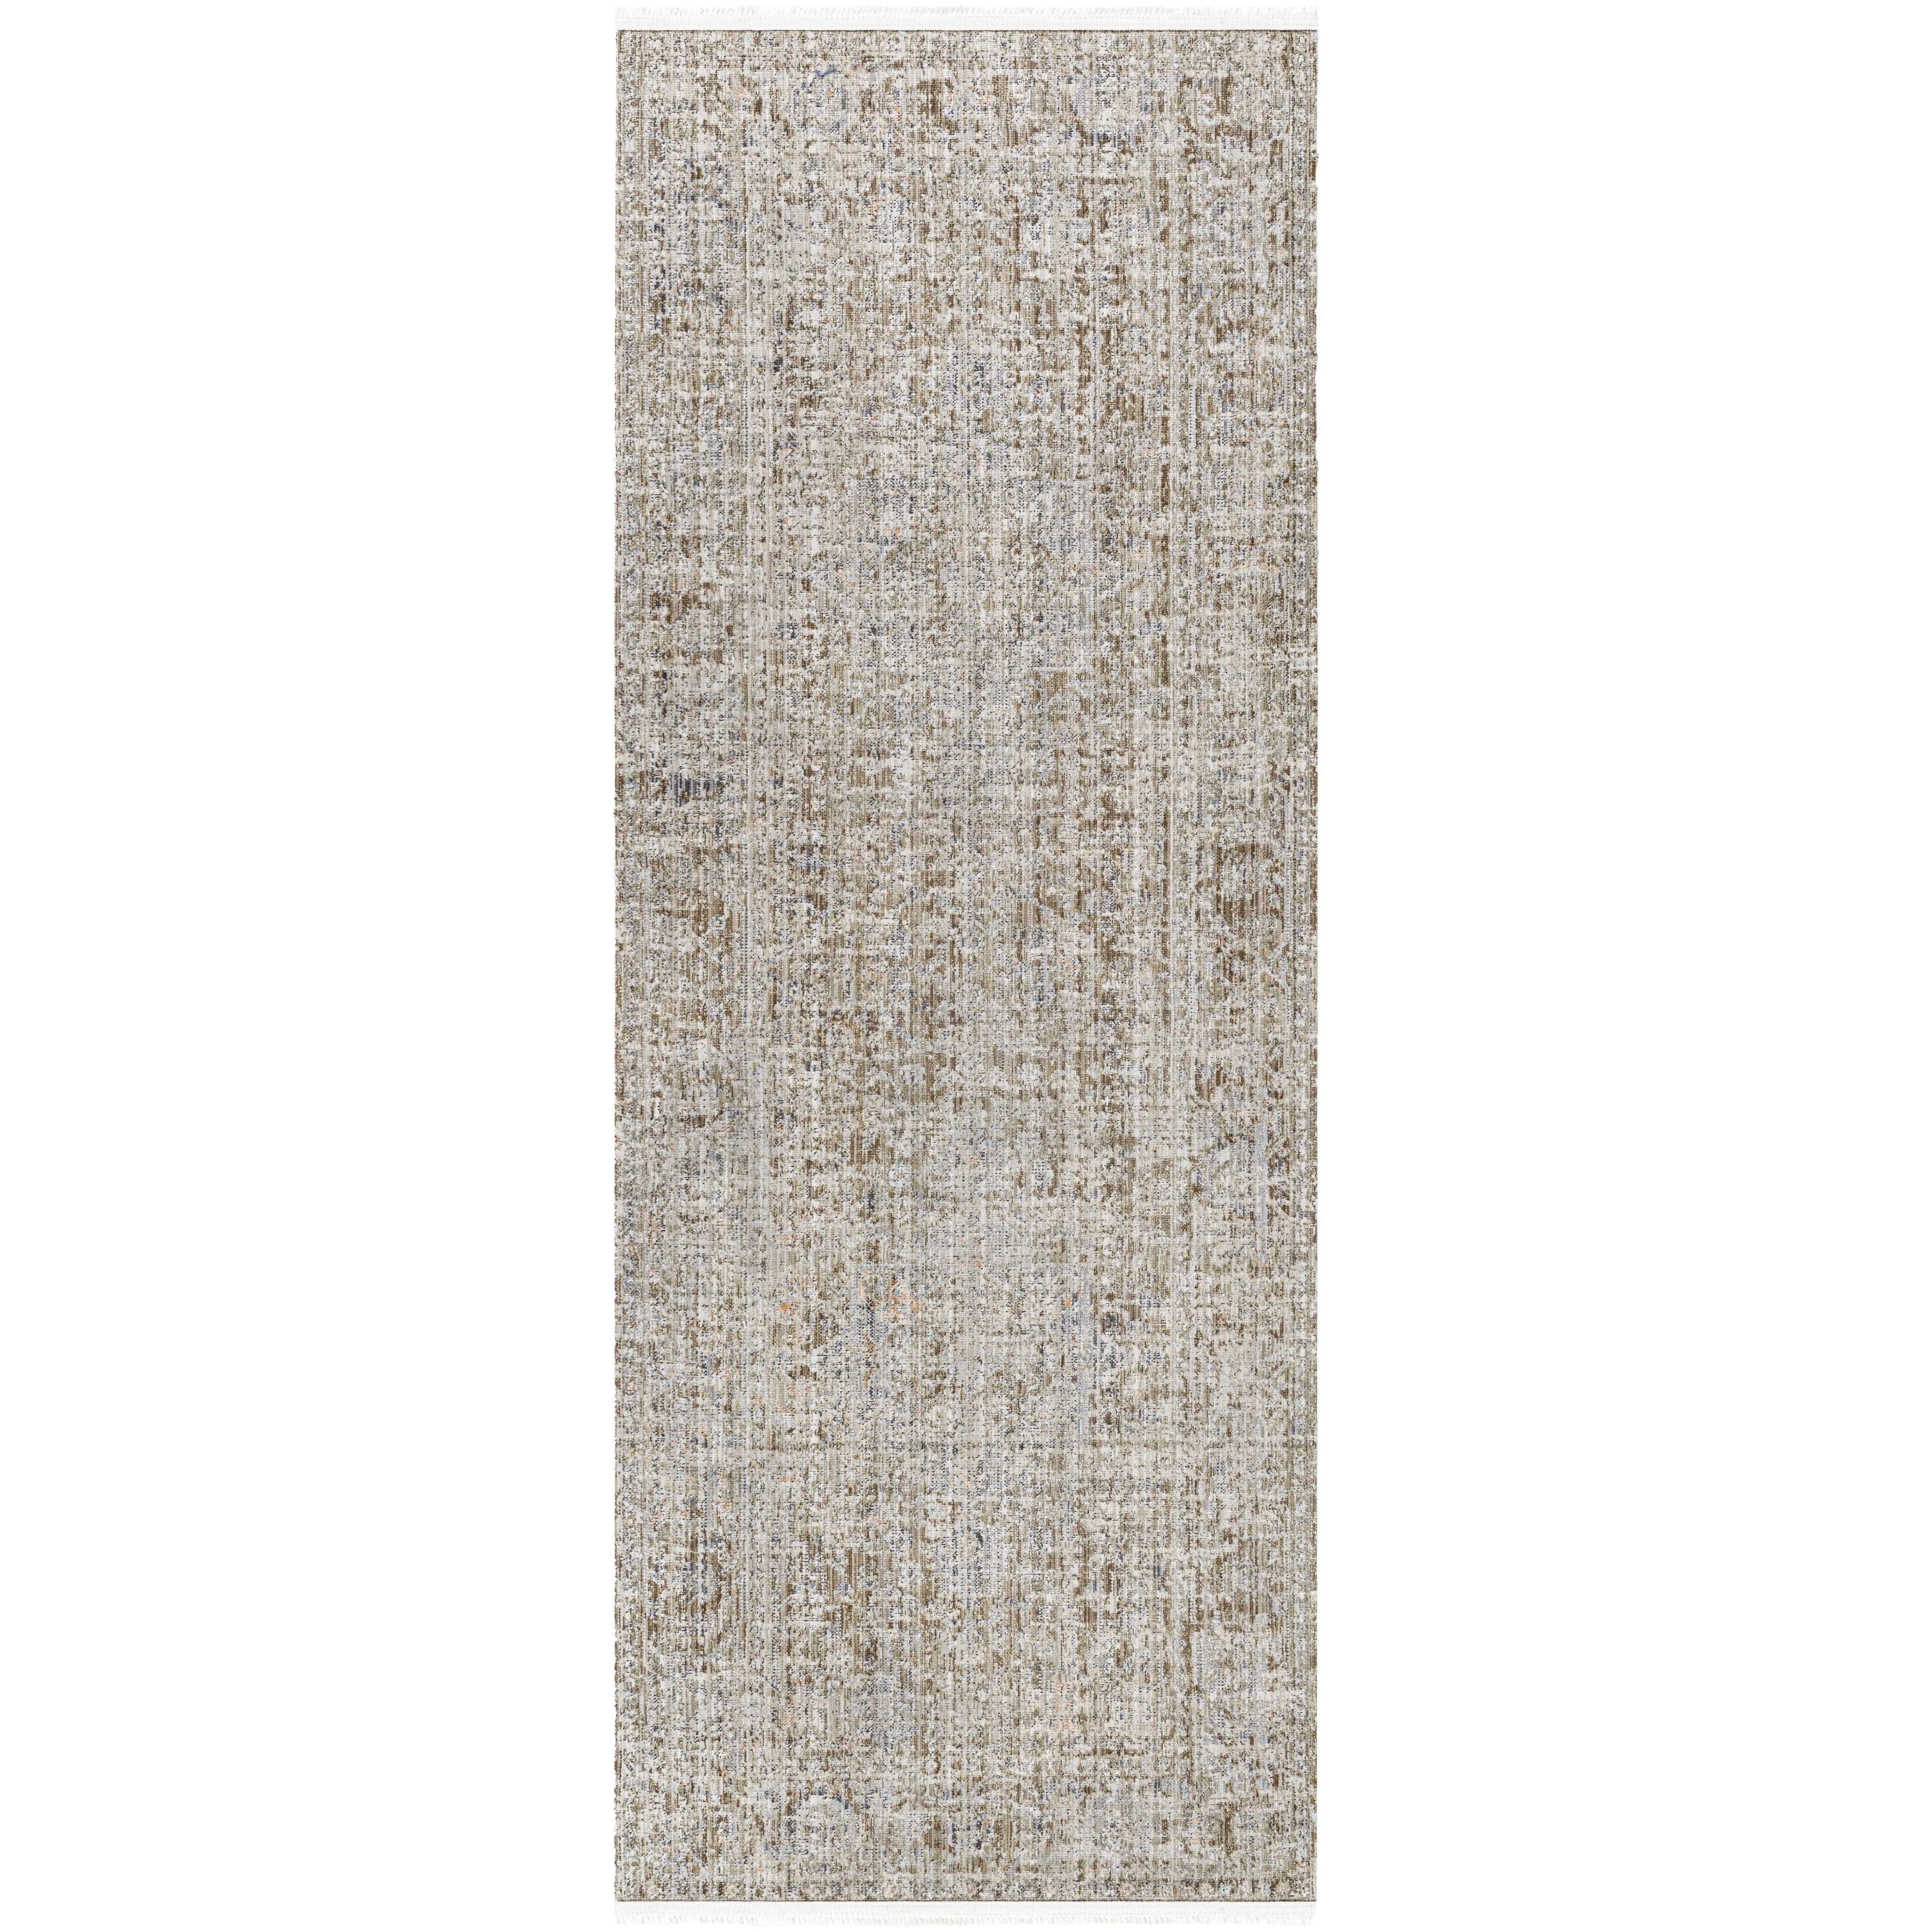 The Margaret area rug brings a touch of timeless beauty to any room. This special collaboration piece from Becki Owens x Surya is a stunning addition to your home. With a distressed feel, the rug evokes a feeling of antique charm. Crafted with polyester, the rug features beautiful neutral tones and is perfect for high traffic areas. Amethyst Home provides interior design, new home construction design consulting, vintage area rugs, and lighting in the Kansas City metro area.